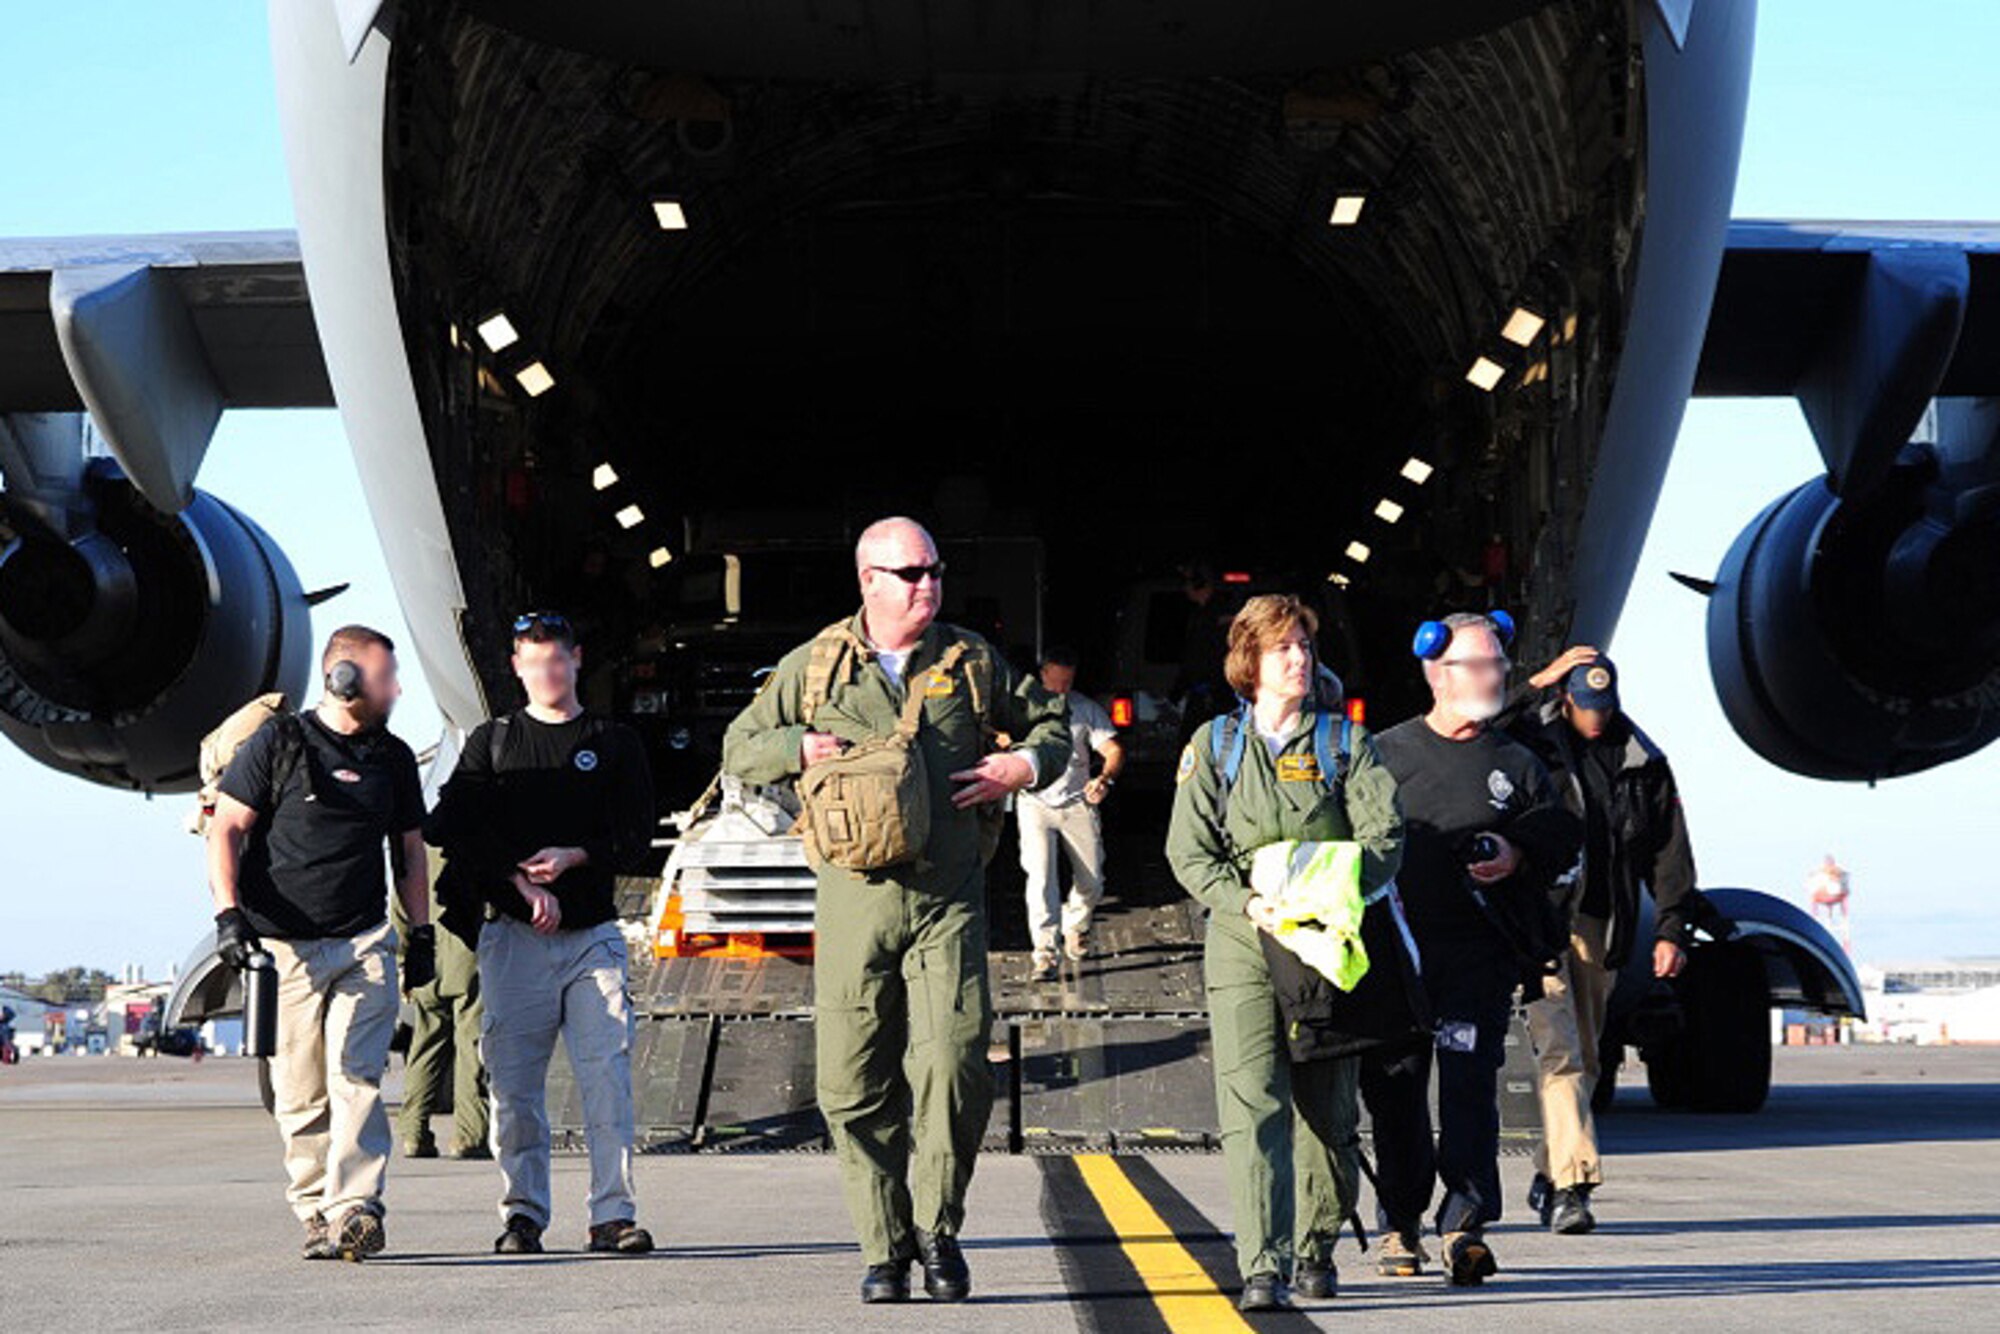 Members of the U.S. Air Force Airlift Control Flight escort members from the FBI Rapid Response Team off of a C-17 Globemaster III during training exercise Patriot Sands Feb. 17, 2016, at Hunter Army Airfield, Georgia. (U.S. Air Force Photo by Senior Airman Jonathan Lane/photo altered to conceal identities of FBI Special Agents)